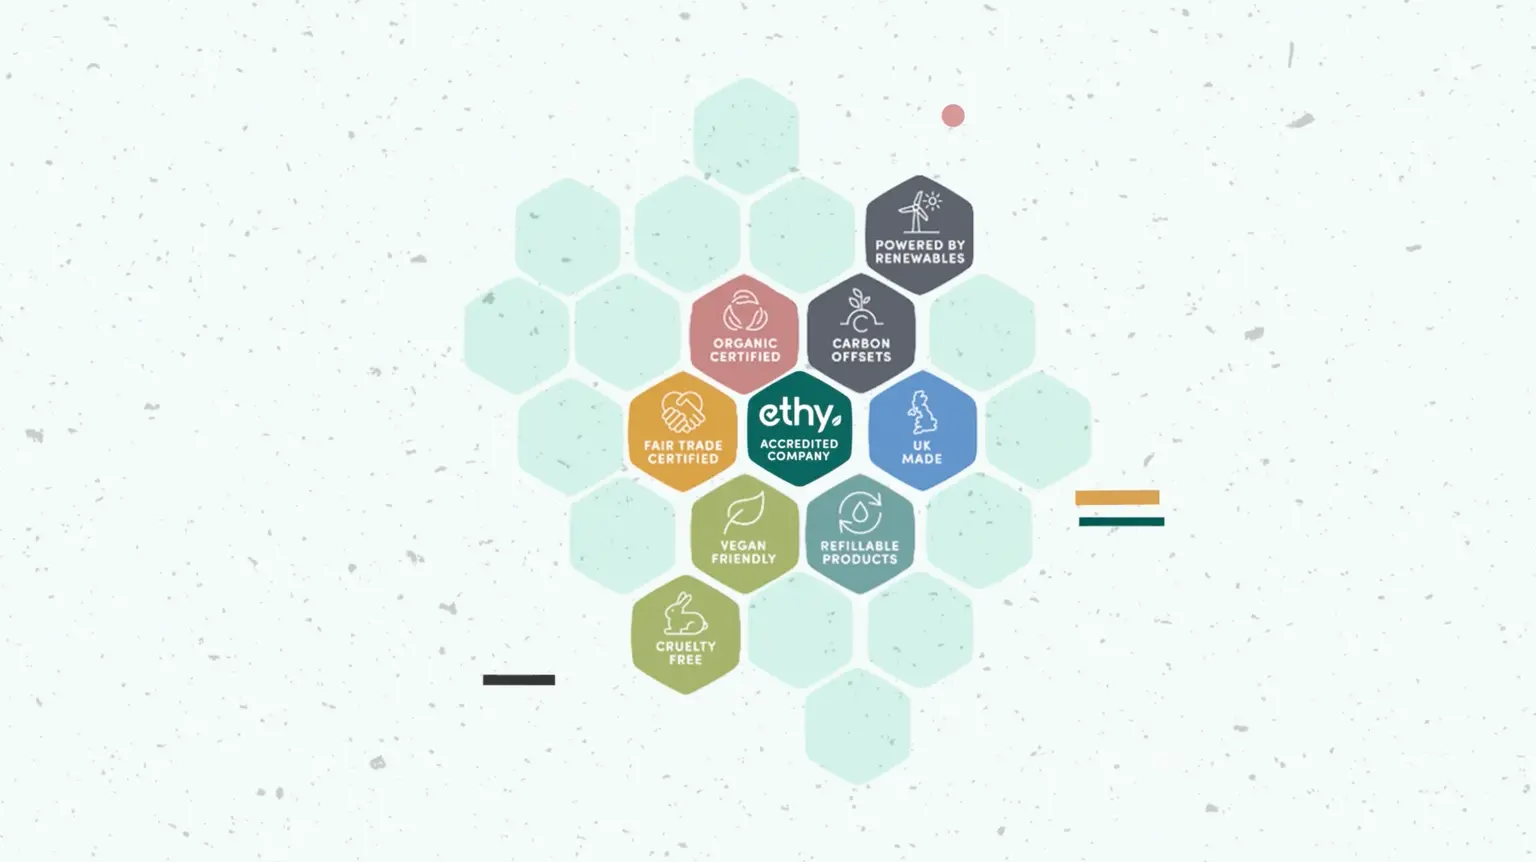 As an ethy accredited company, you are provided with a bespoke Impact Hive that helps to communicate an overview of your sustainability journey so far. The Impact Hive is comprised of individual trust marks for which your company has met the specific criteria for during the assessment stage. 

The Impact Hive should be used to represent company-wide sustainability achievements and not be used to represent a particular product or service. The Impact Hive should not be combined with any other assets and should be applied to be as visible as possible. 